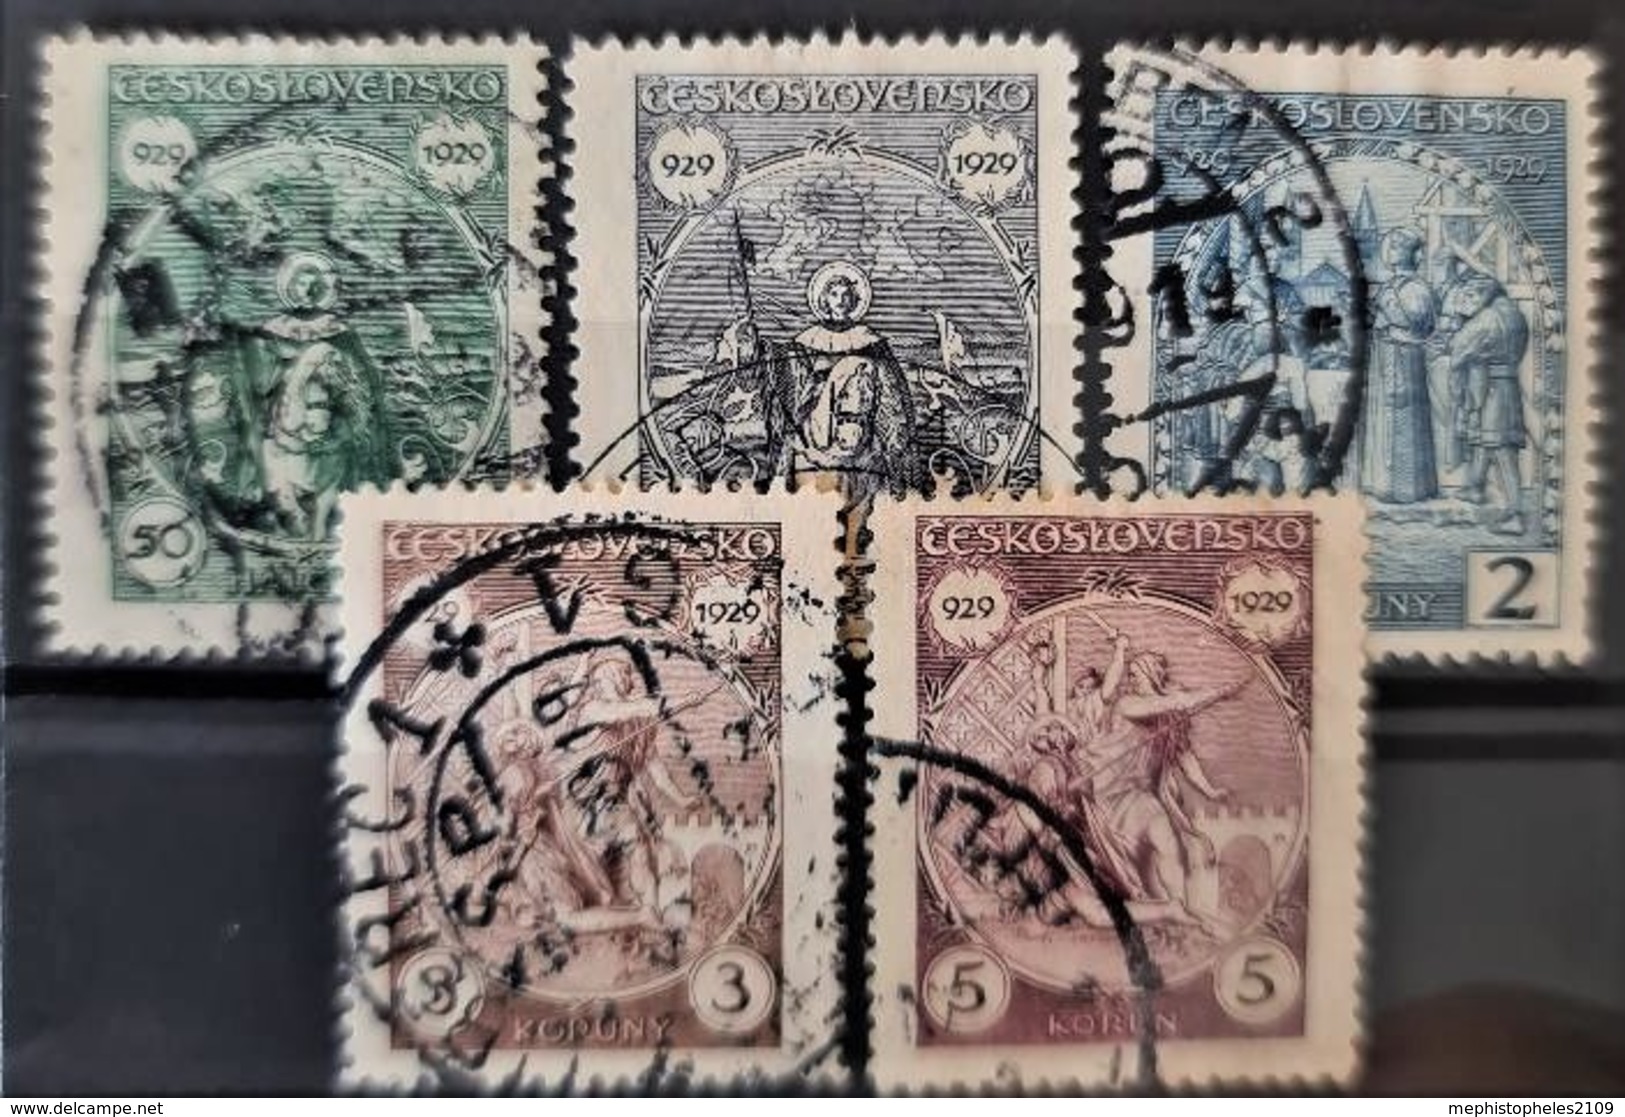 CZECHOSLOVAKIA 1929 - Canceled - Sc# 159-163 - Complete Set! - Used Stamps